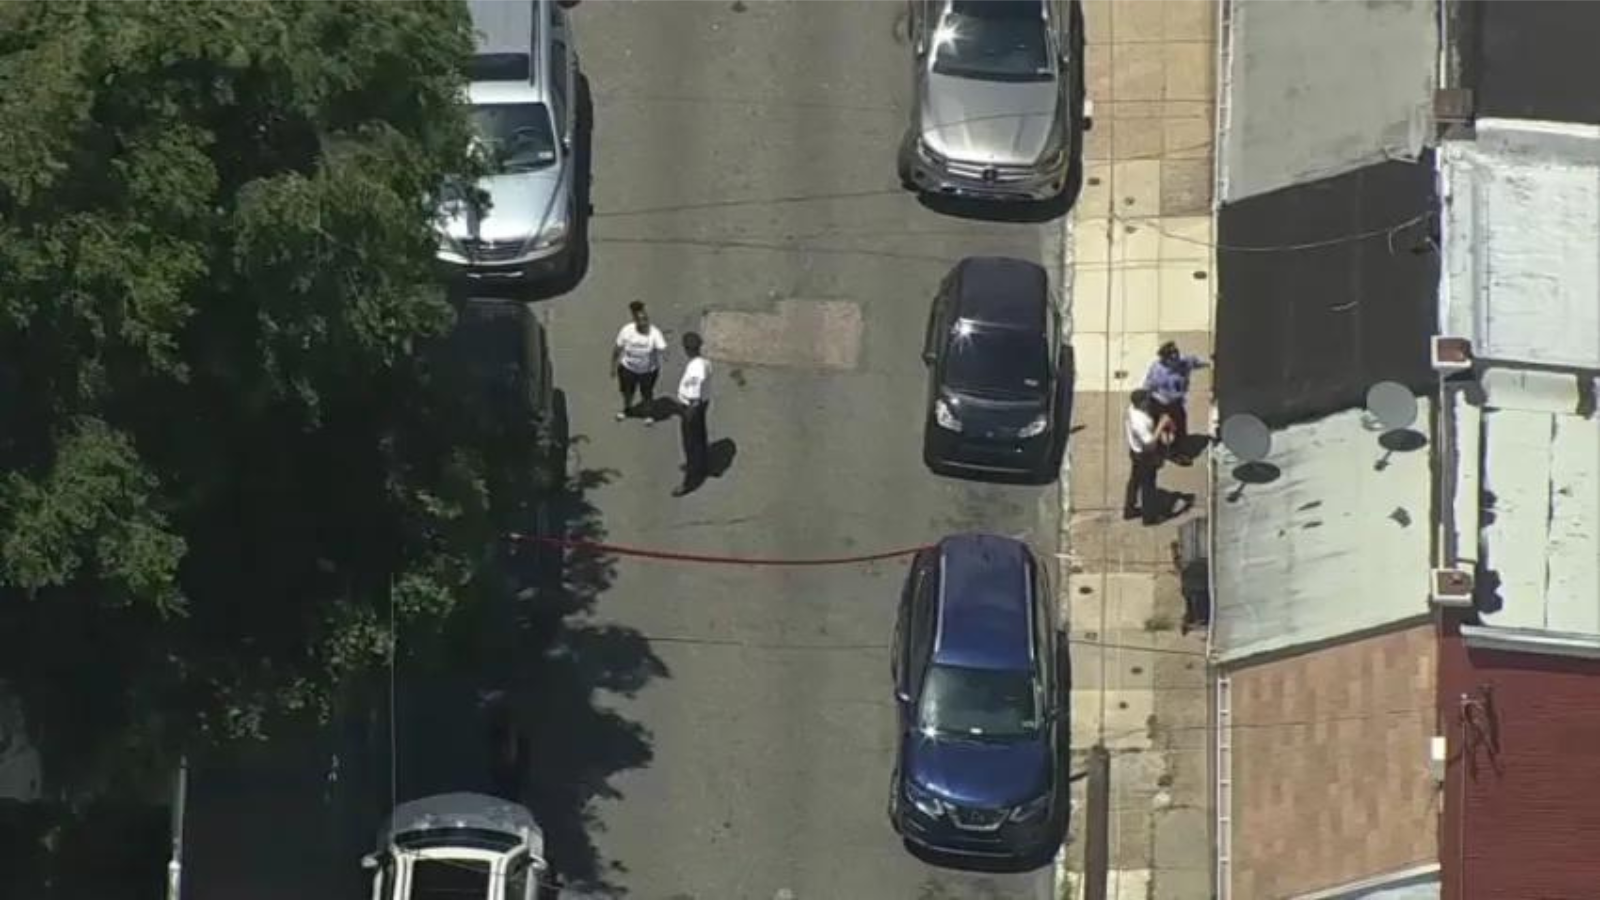 8-year-old shot in leg in East Frankford